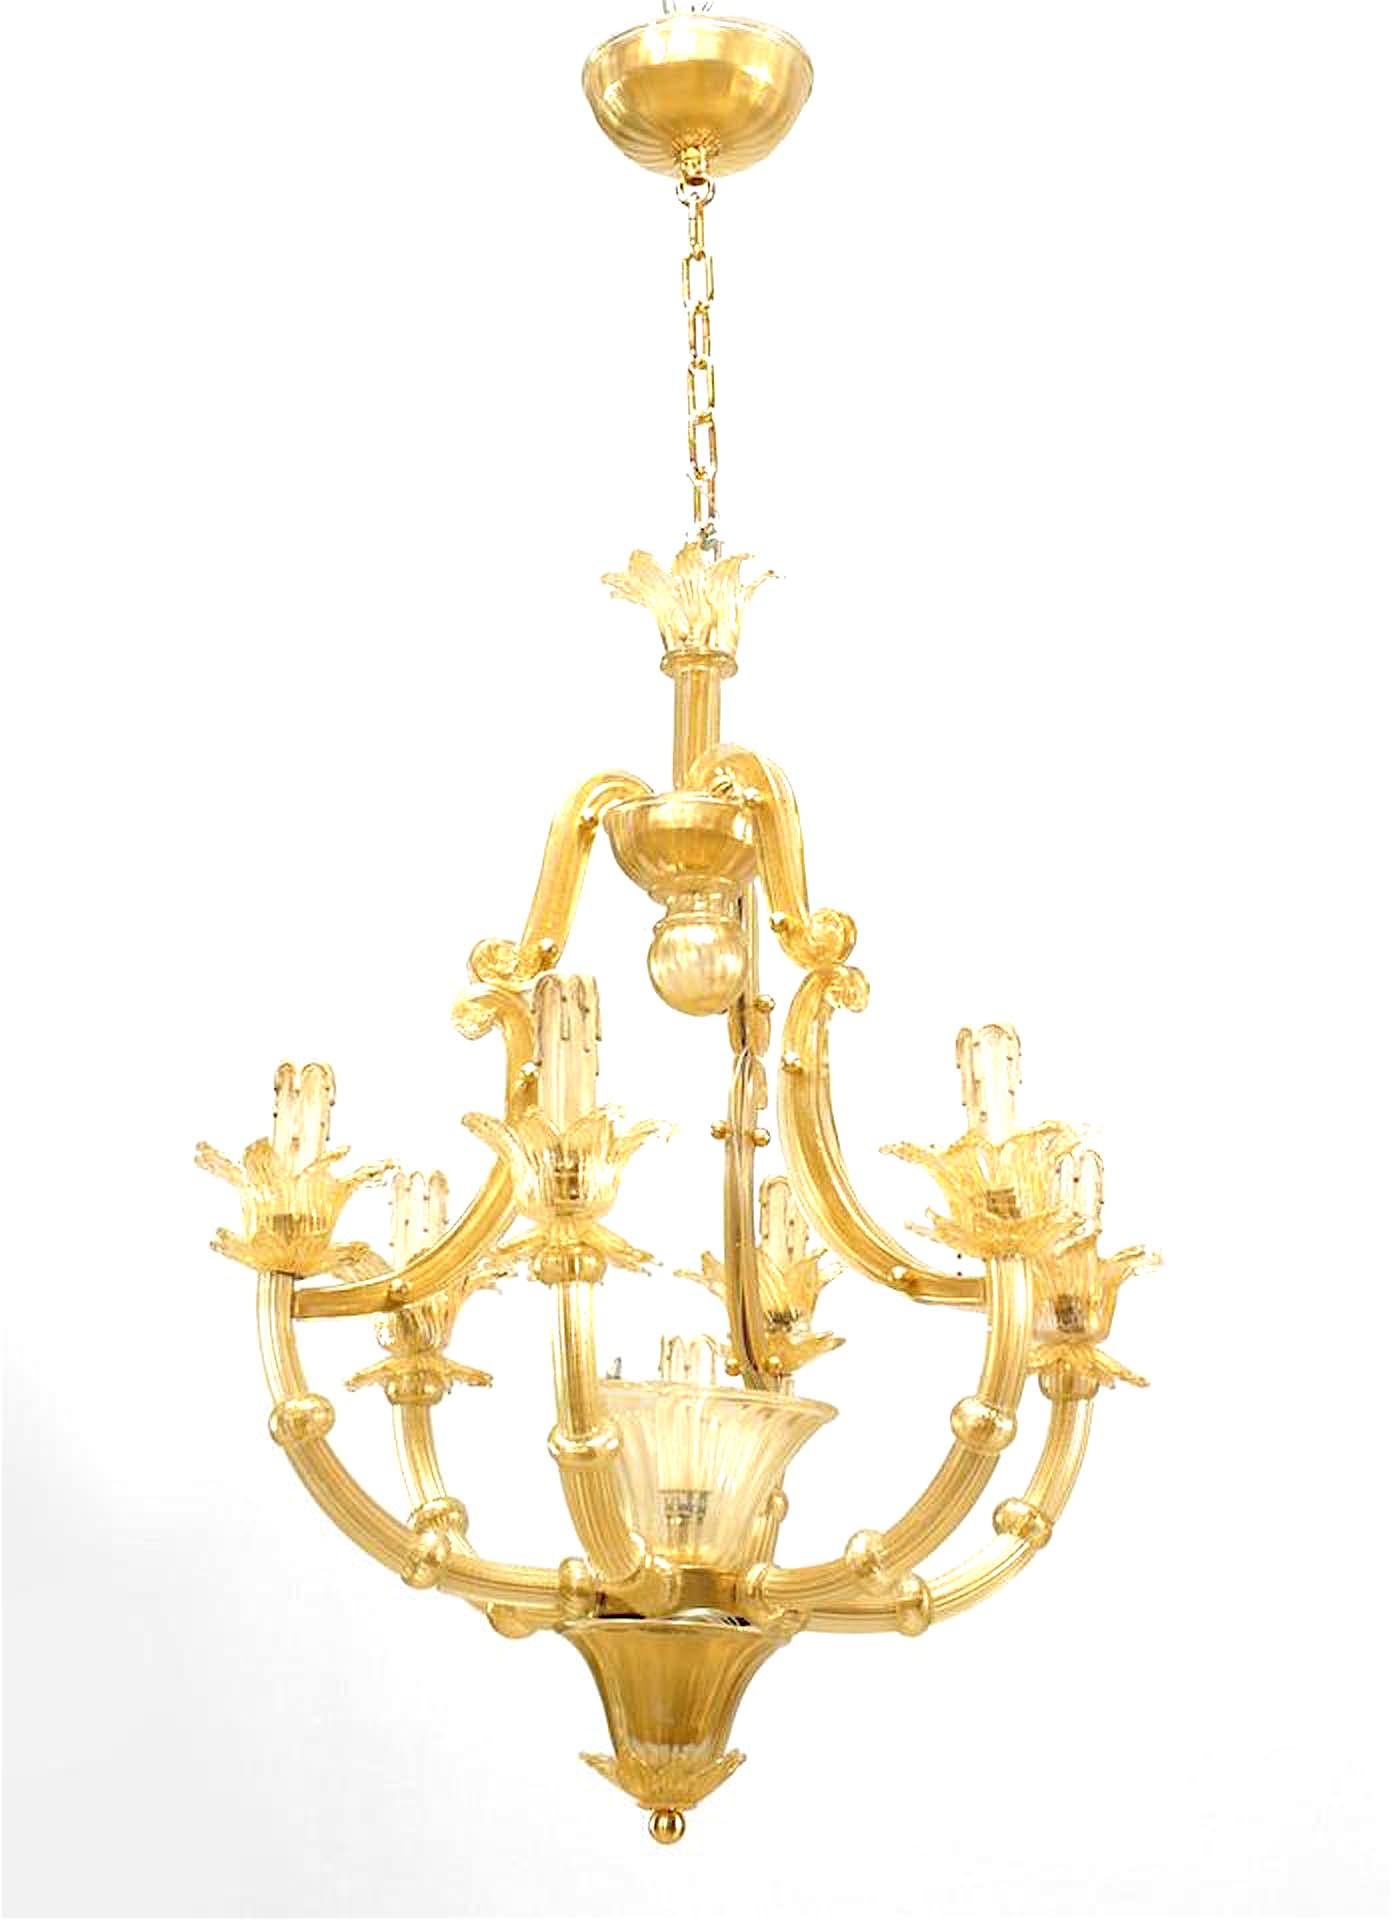 Italian Venetian Murano hand blown gold dusted 6 fluted arm chandeliers with flower bobeche & cup and three scroll arm supports rising from a 7th central light.
